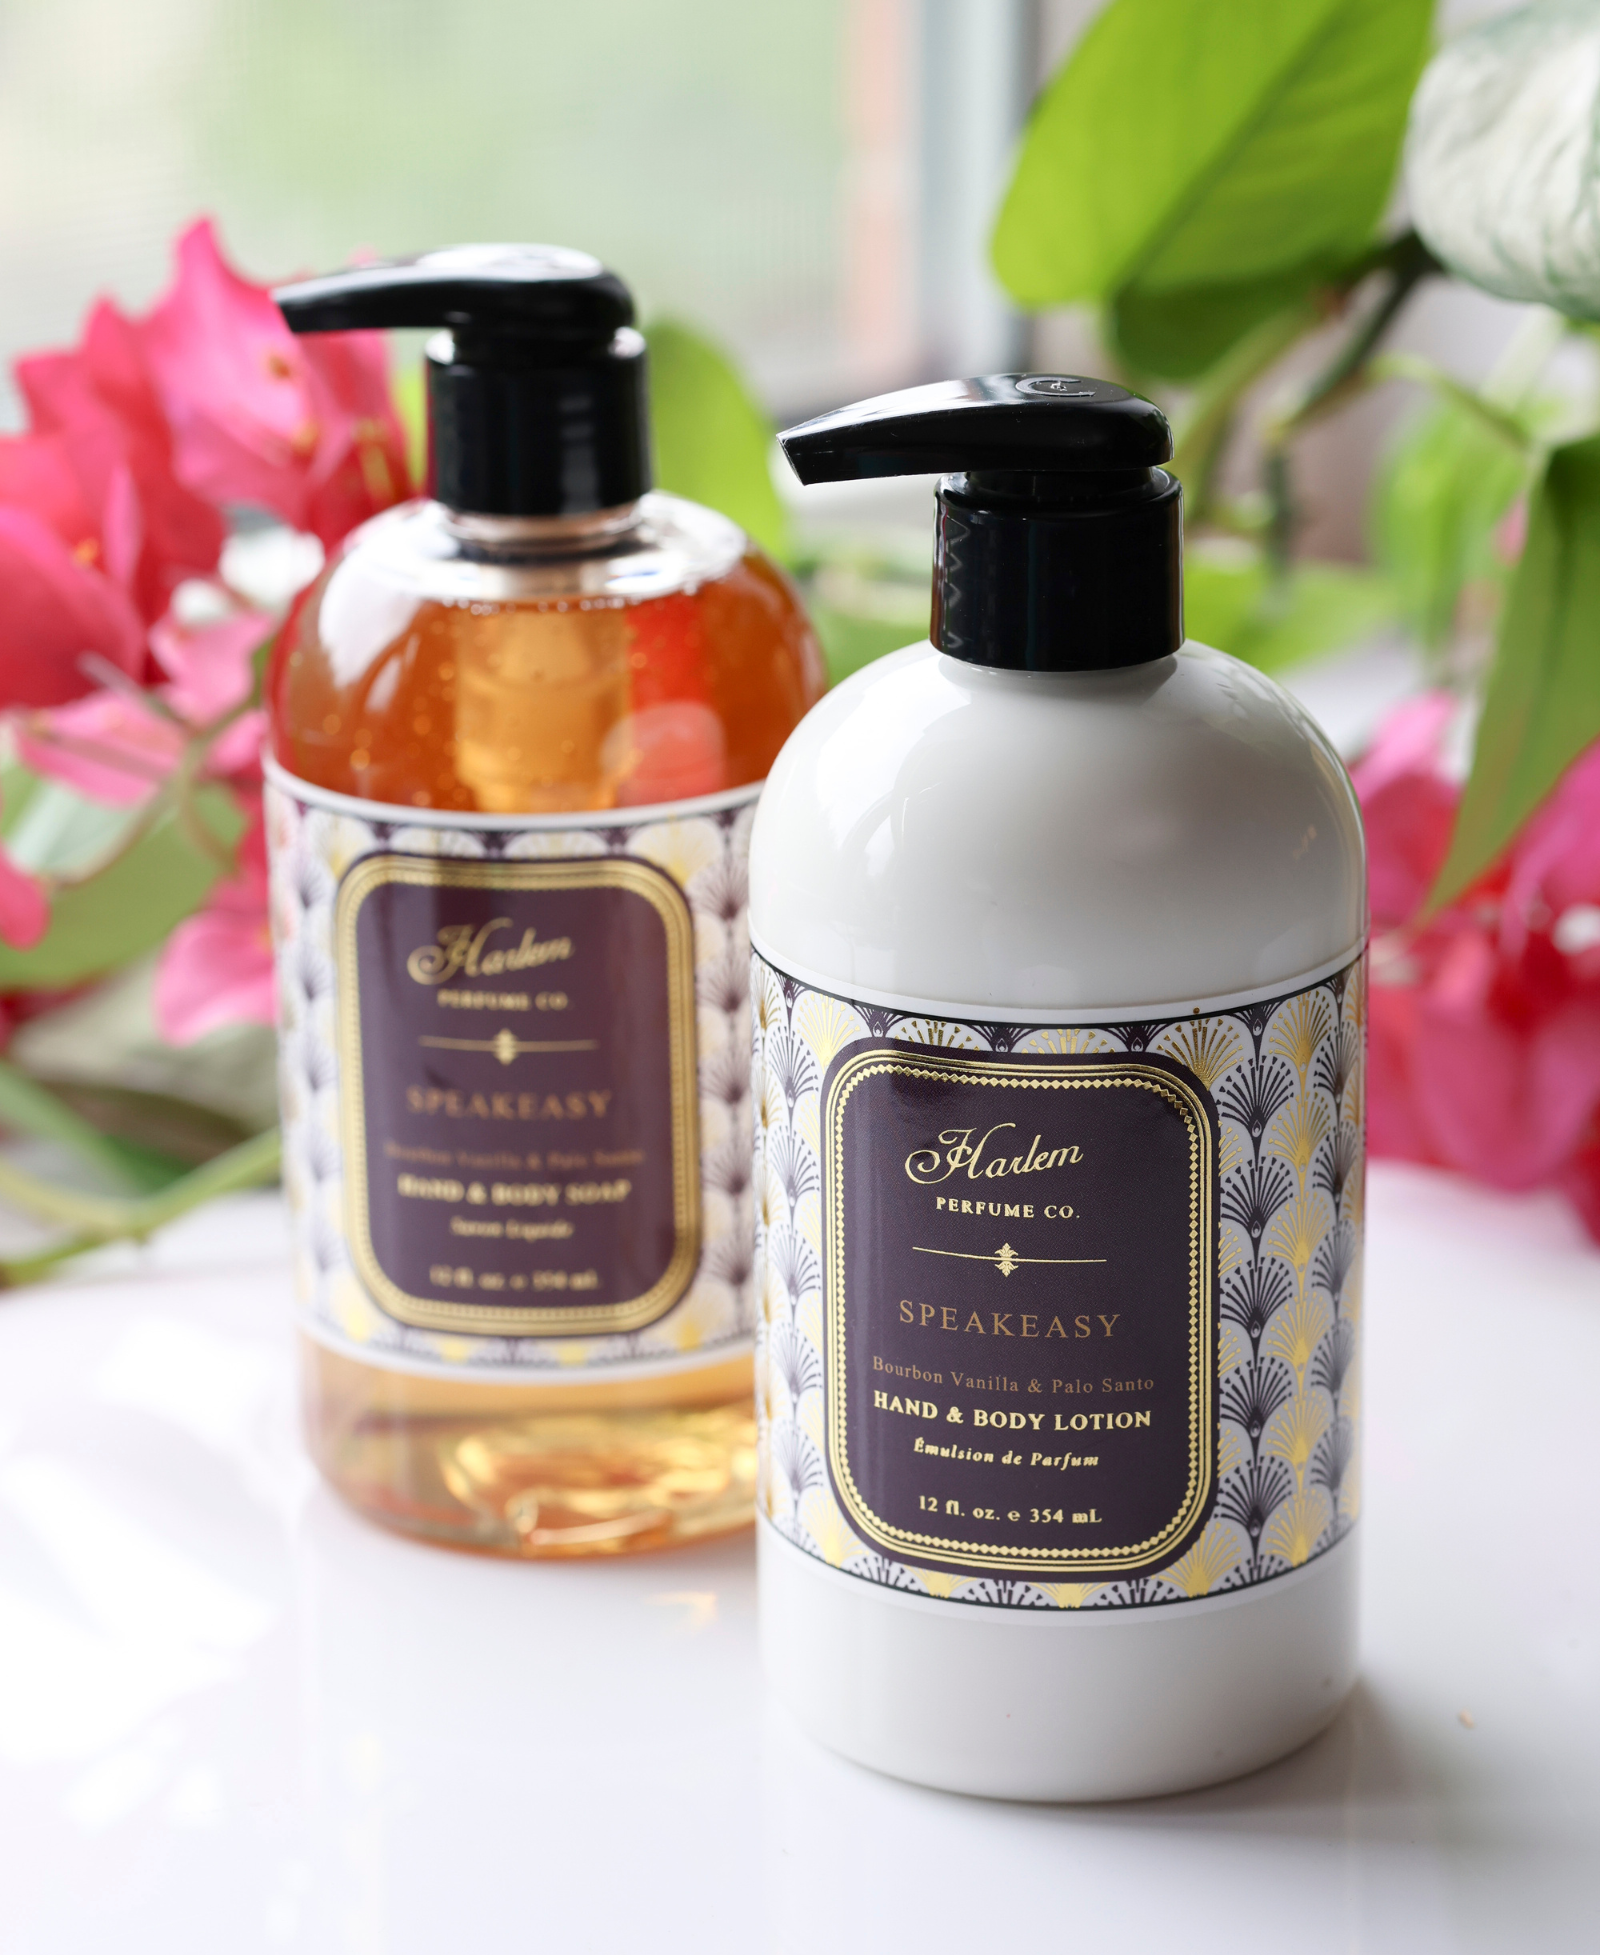 This is an image of our Speakeasy Soap and Lotion pictured next to pink flowers. The bottles have a black pump and the labels have a unique Art Deco print with the details of both the soap and the lotion.